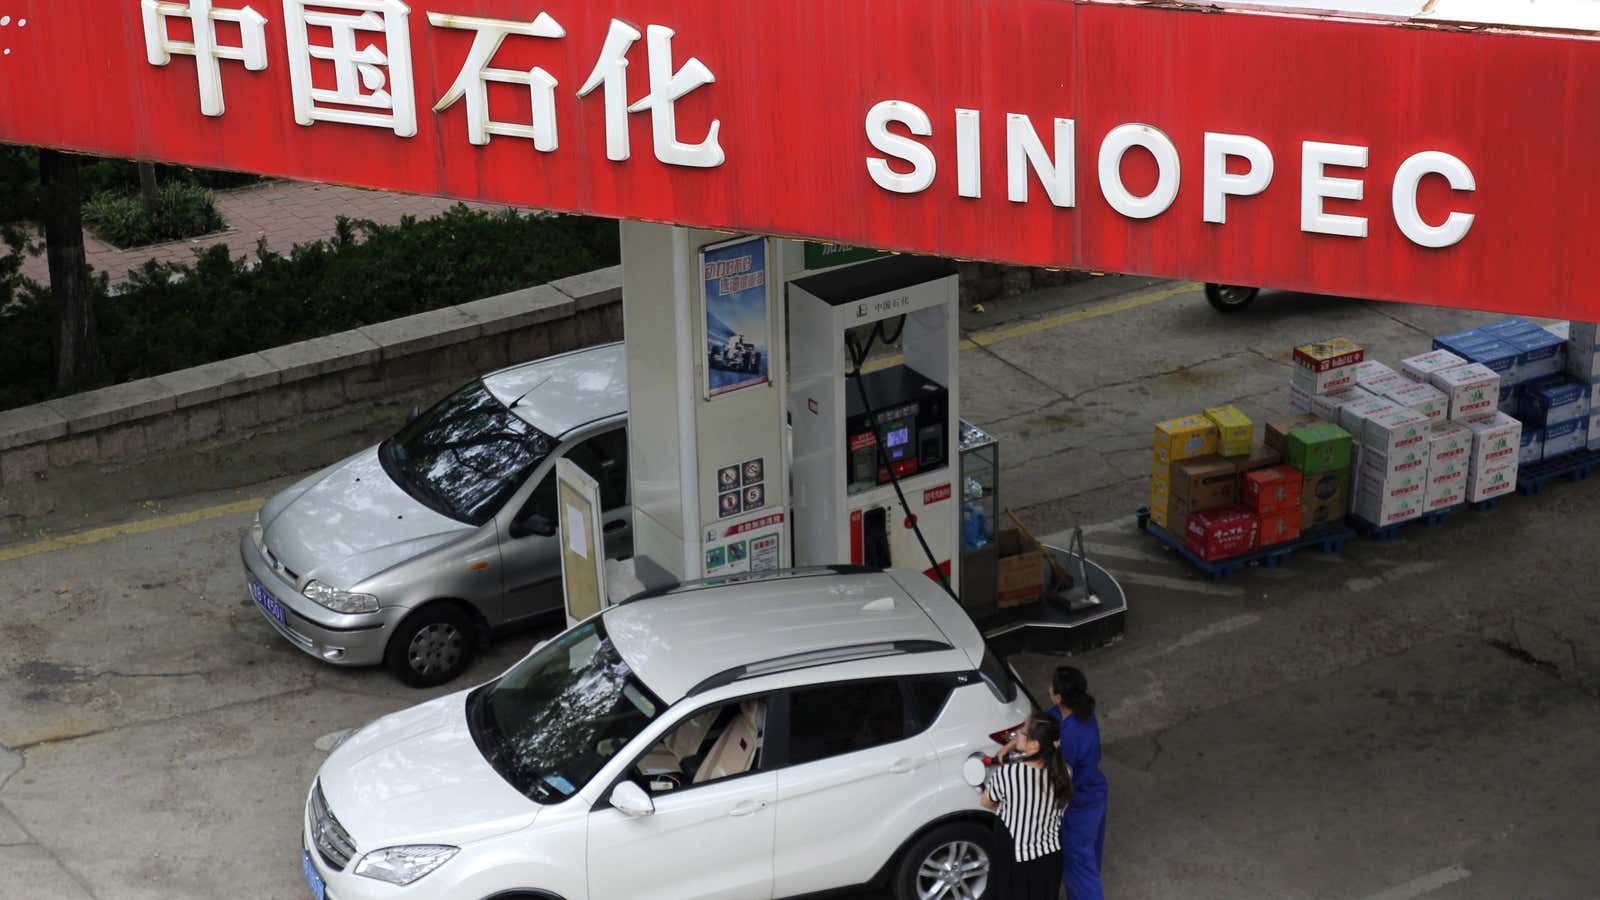 China’s state-owned oil producer Sinopec has become one of the world’s biggest customers for green hydrogen electrolyzers.